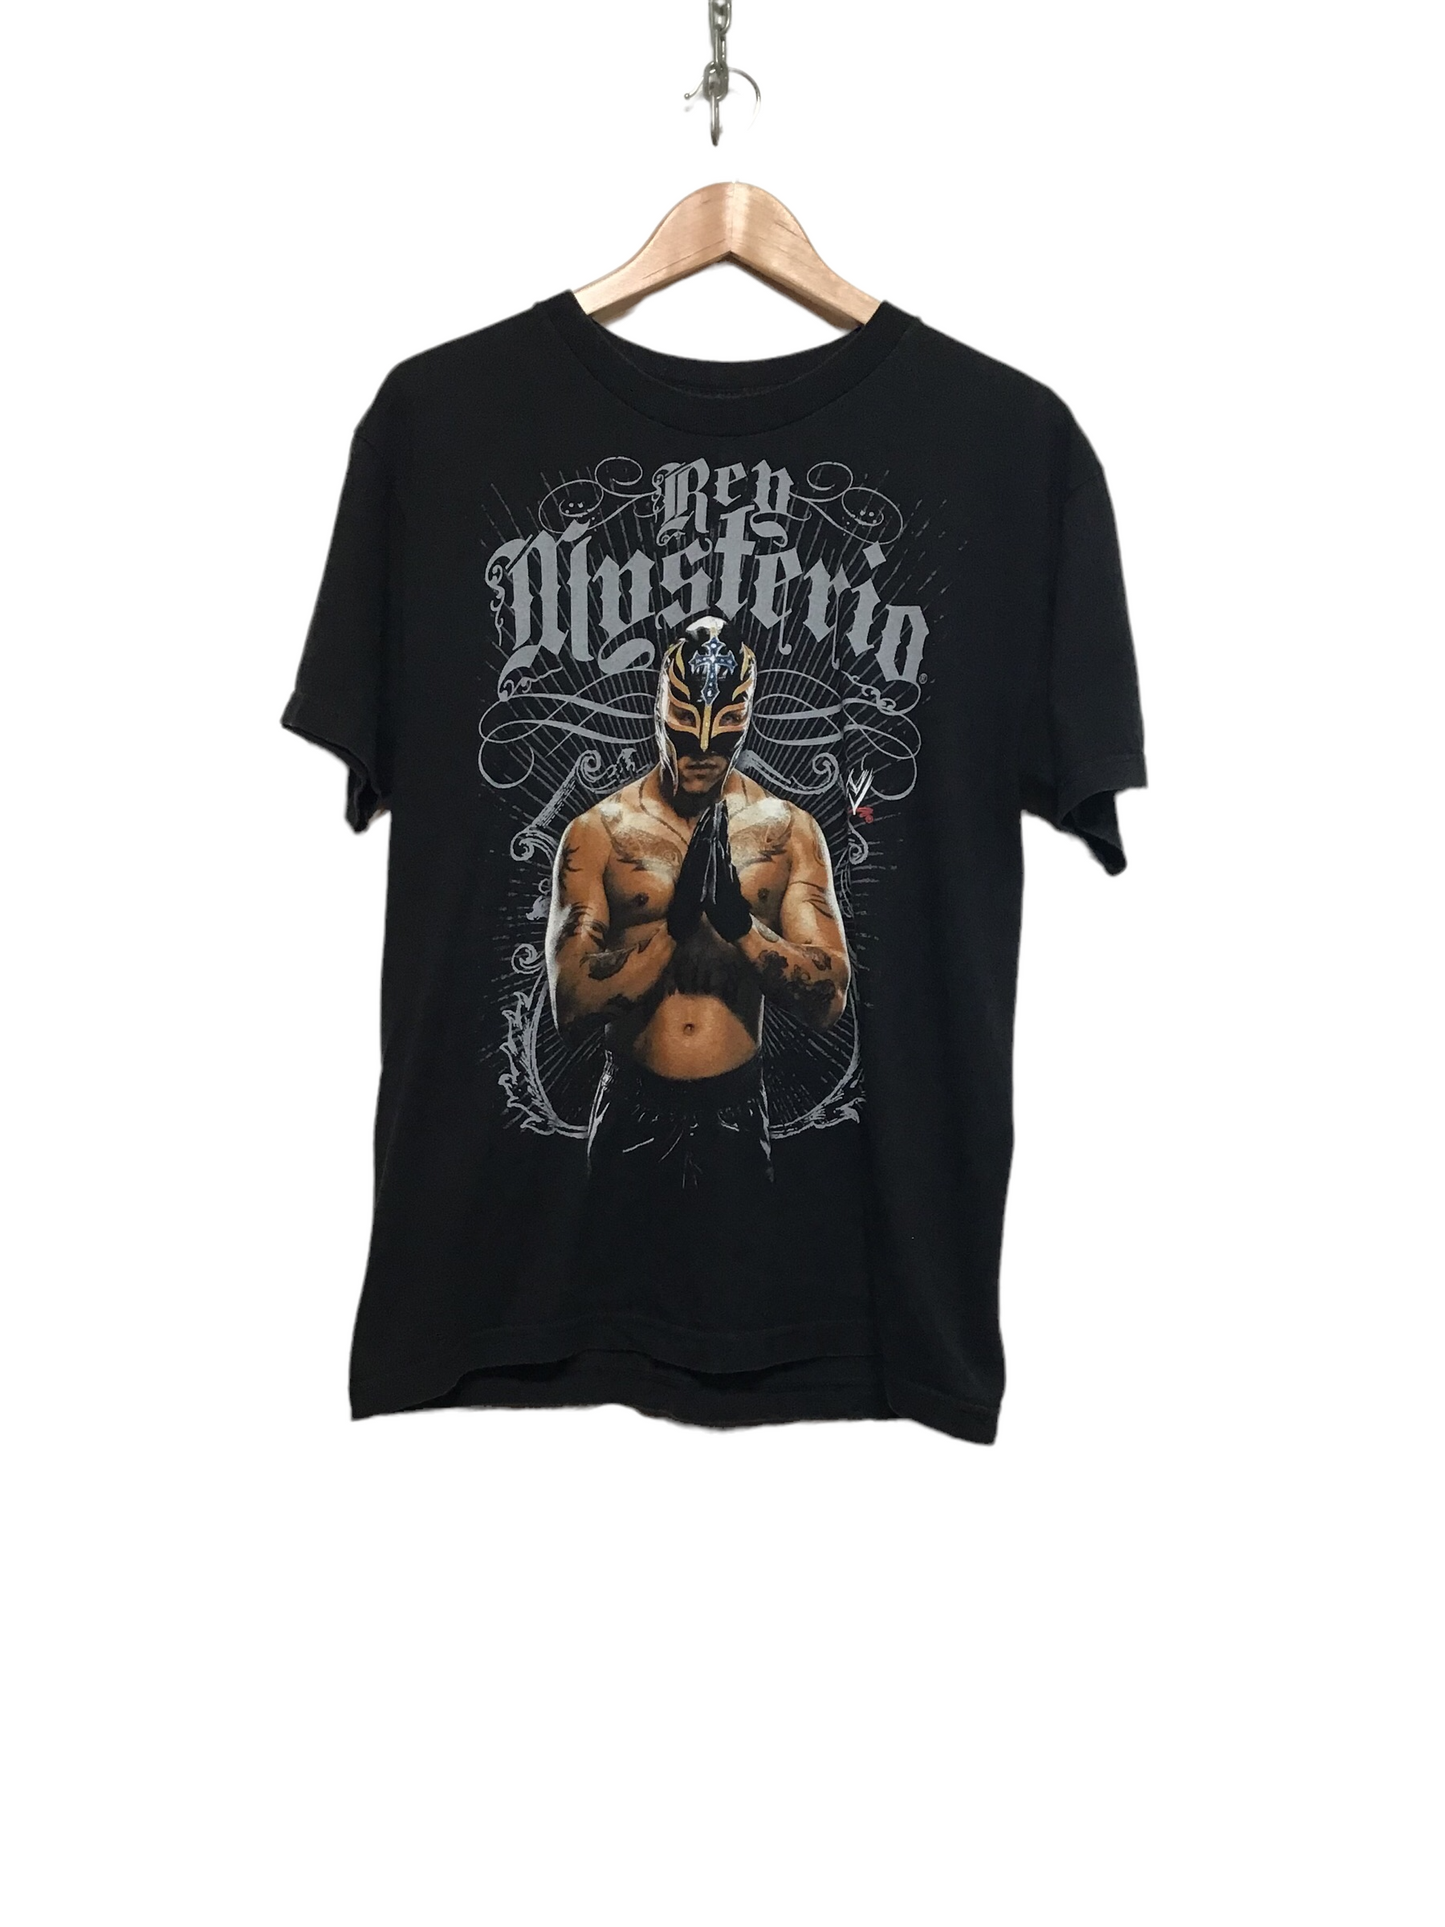 WWE Graphic Tee (Size S)